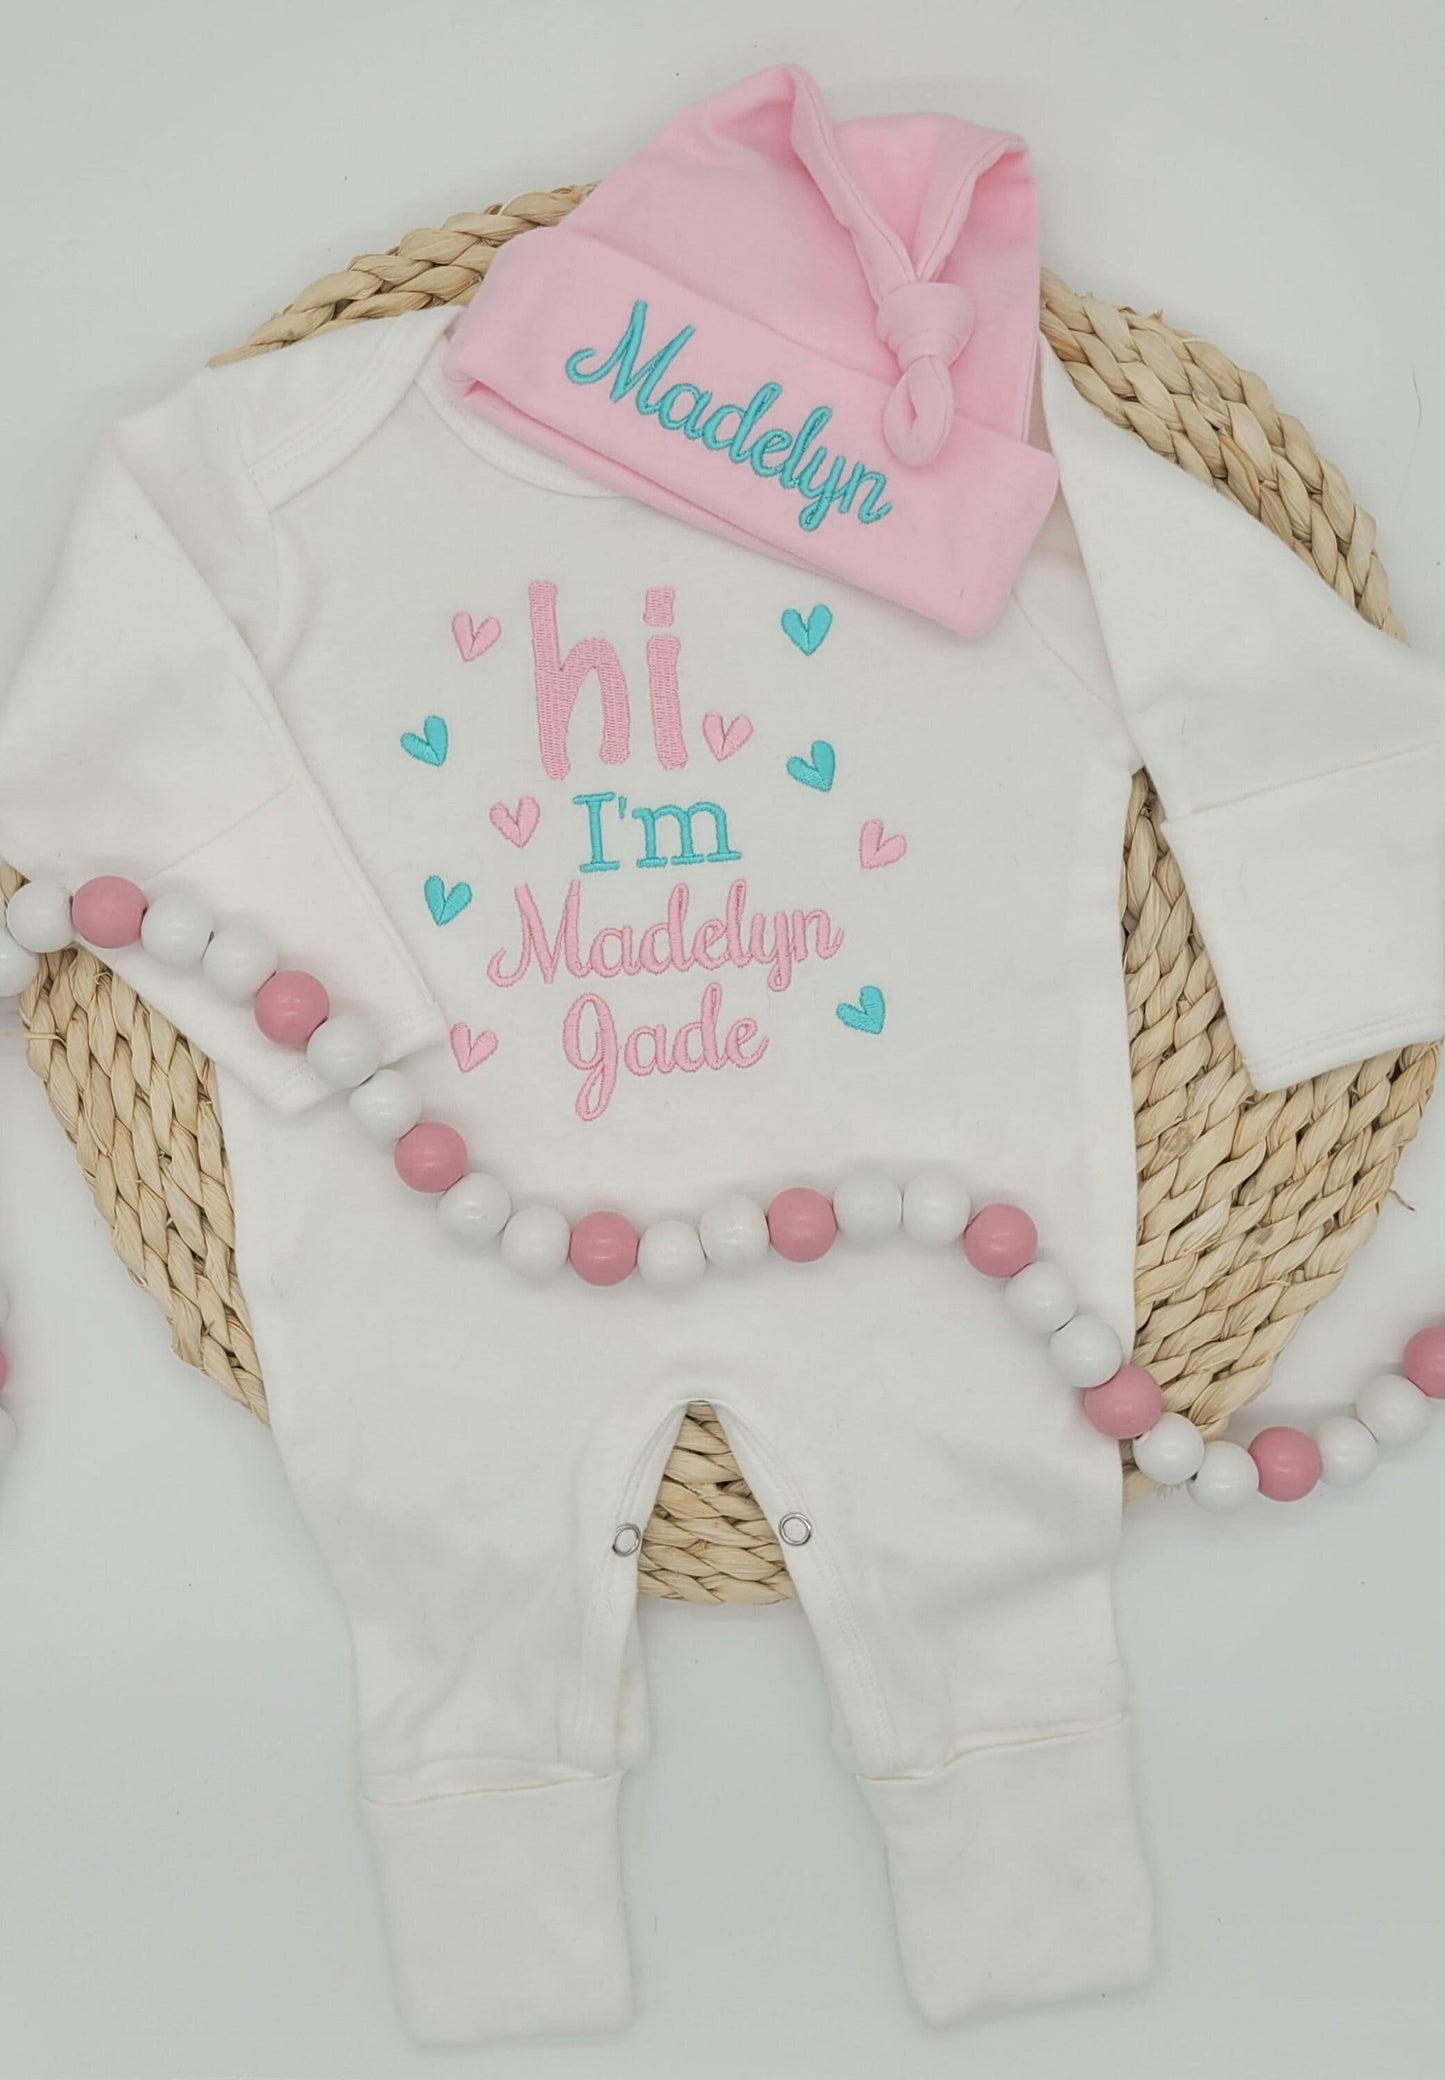 Hi Girl Outfit with Hearts in Pink and Aqua Embroidery